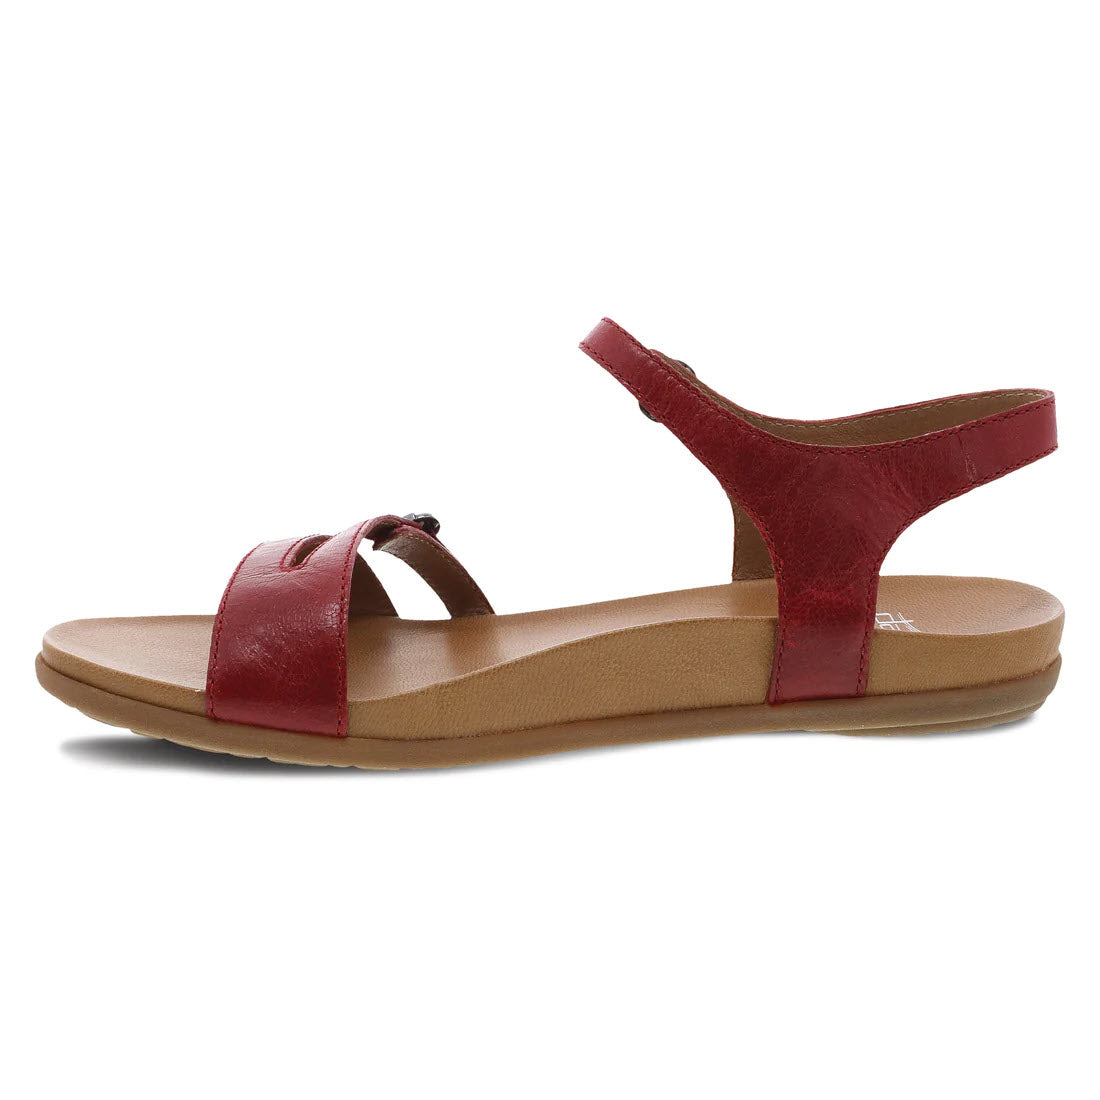 A single Dansko Janelle red glazed leather sandal with adjustable closures around the ankle and over the toes, displayed on a white background.